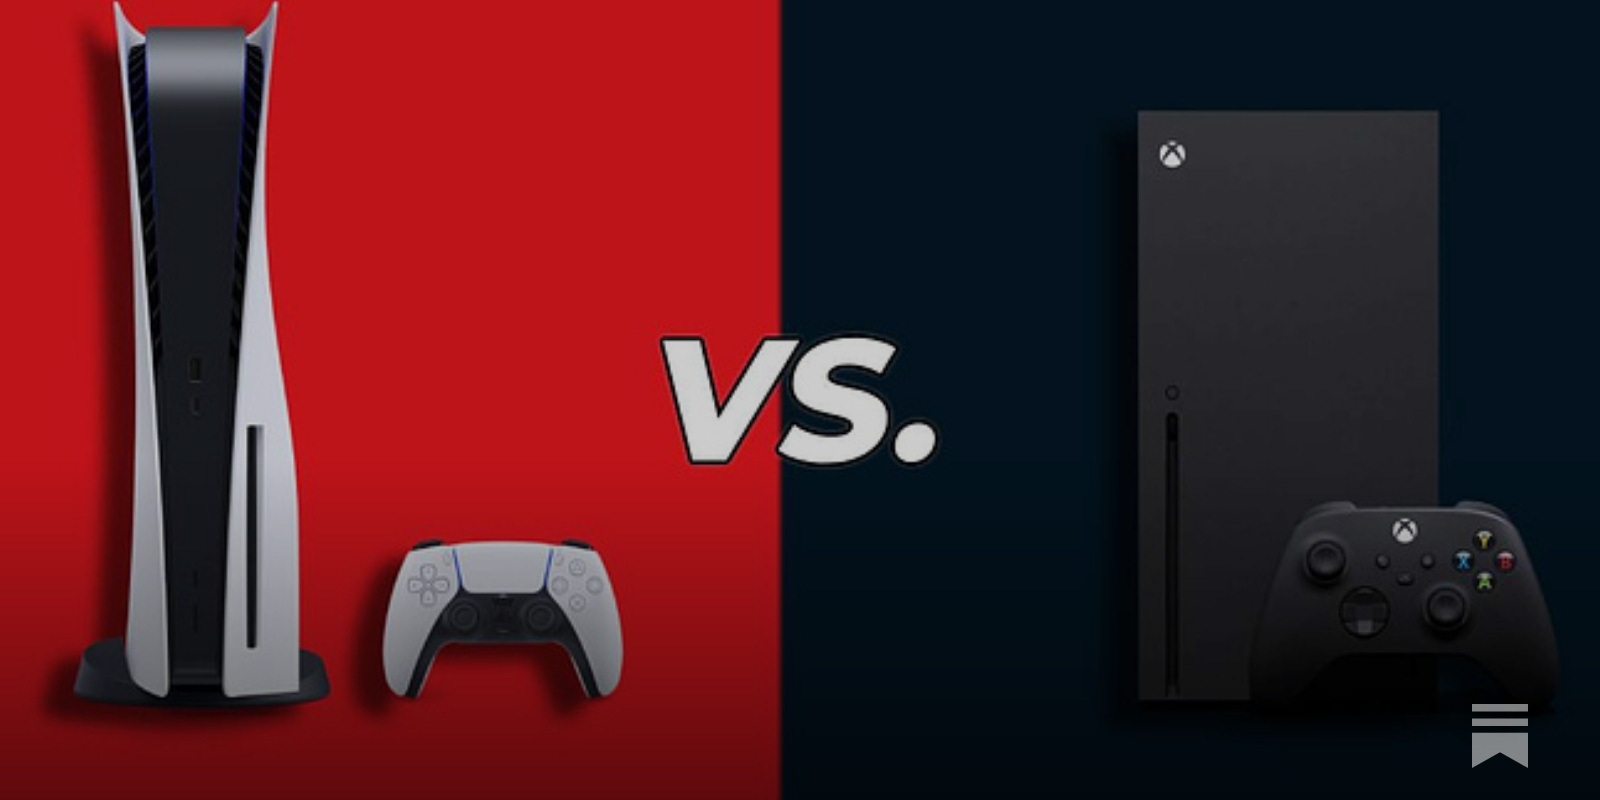 Xbox Series X vs. PC: Which is right for you?